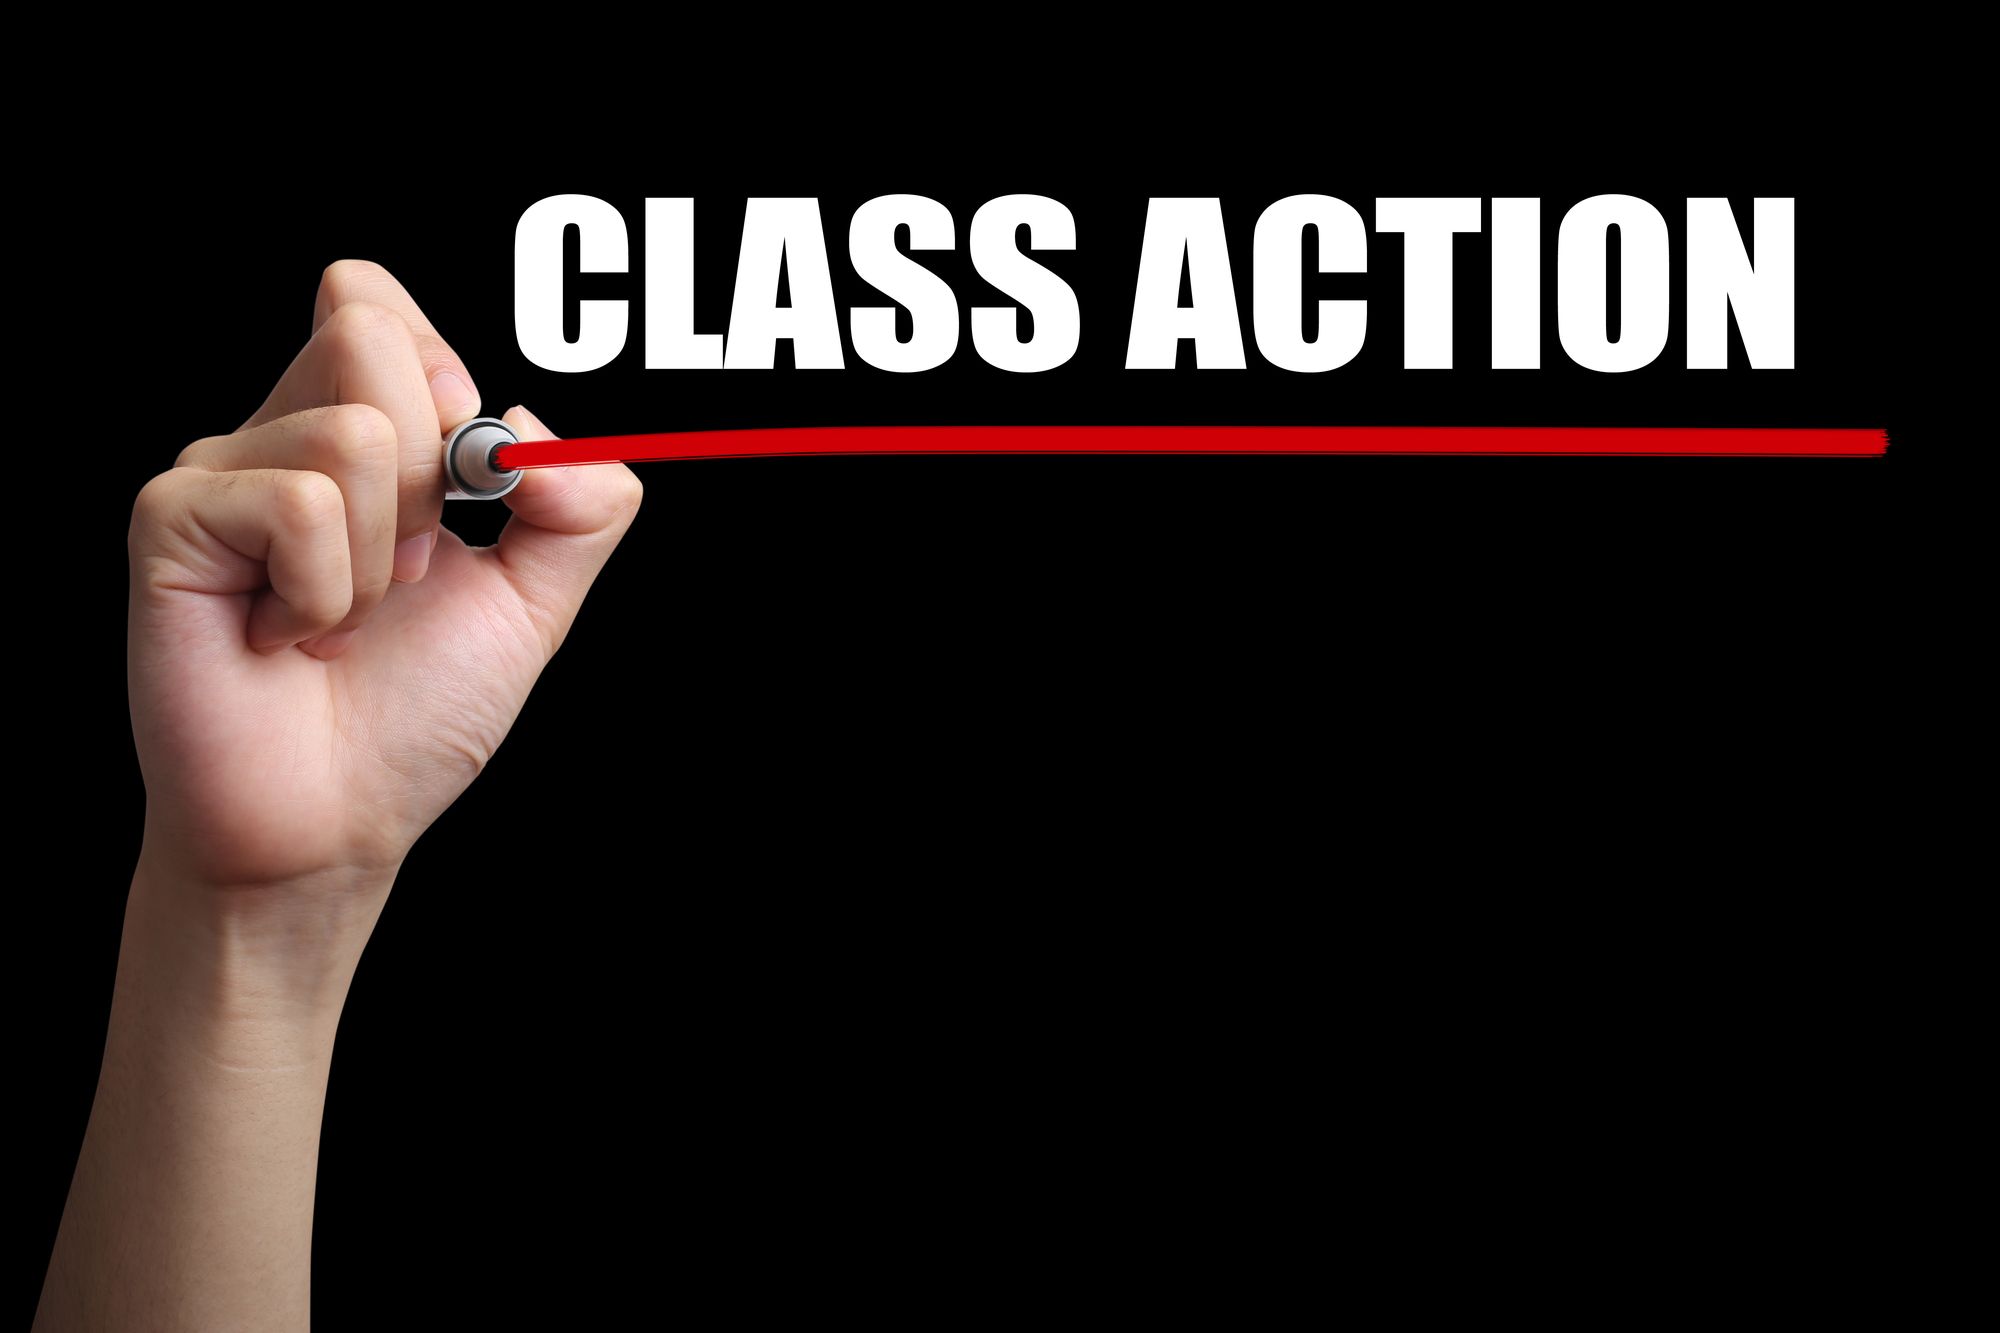 How to File a Class Action Lawsuit